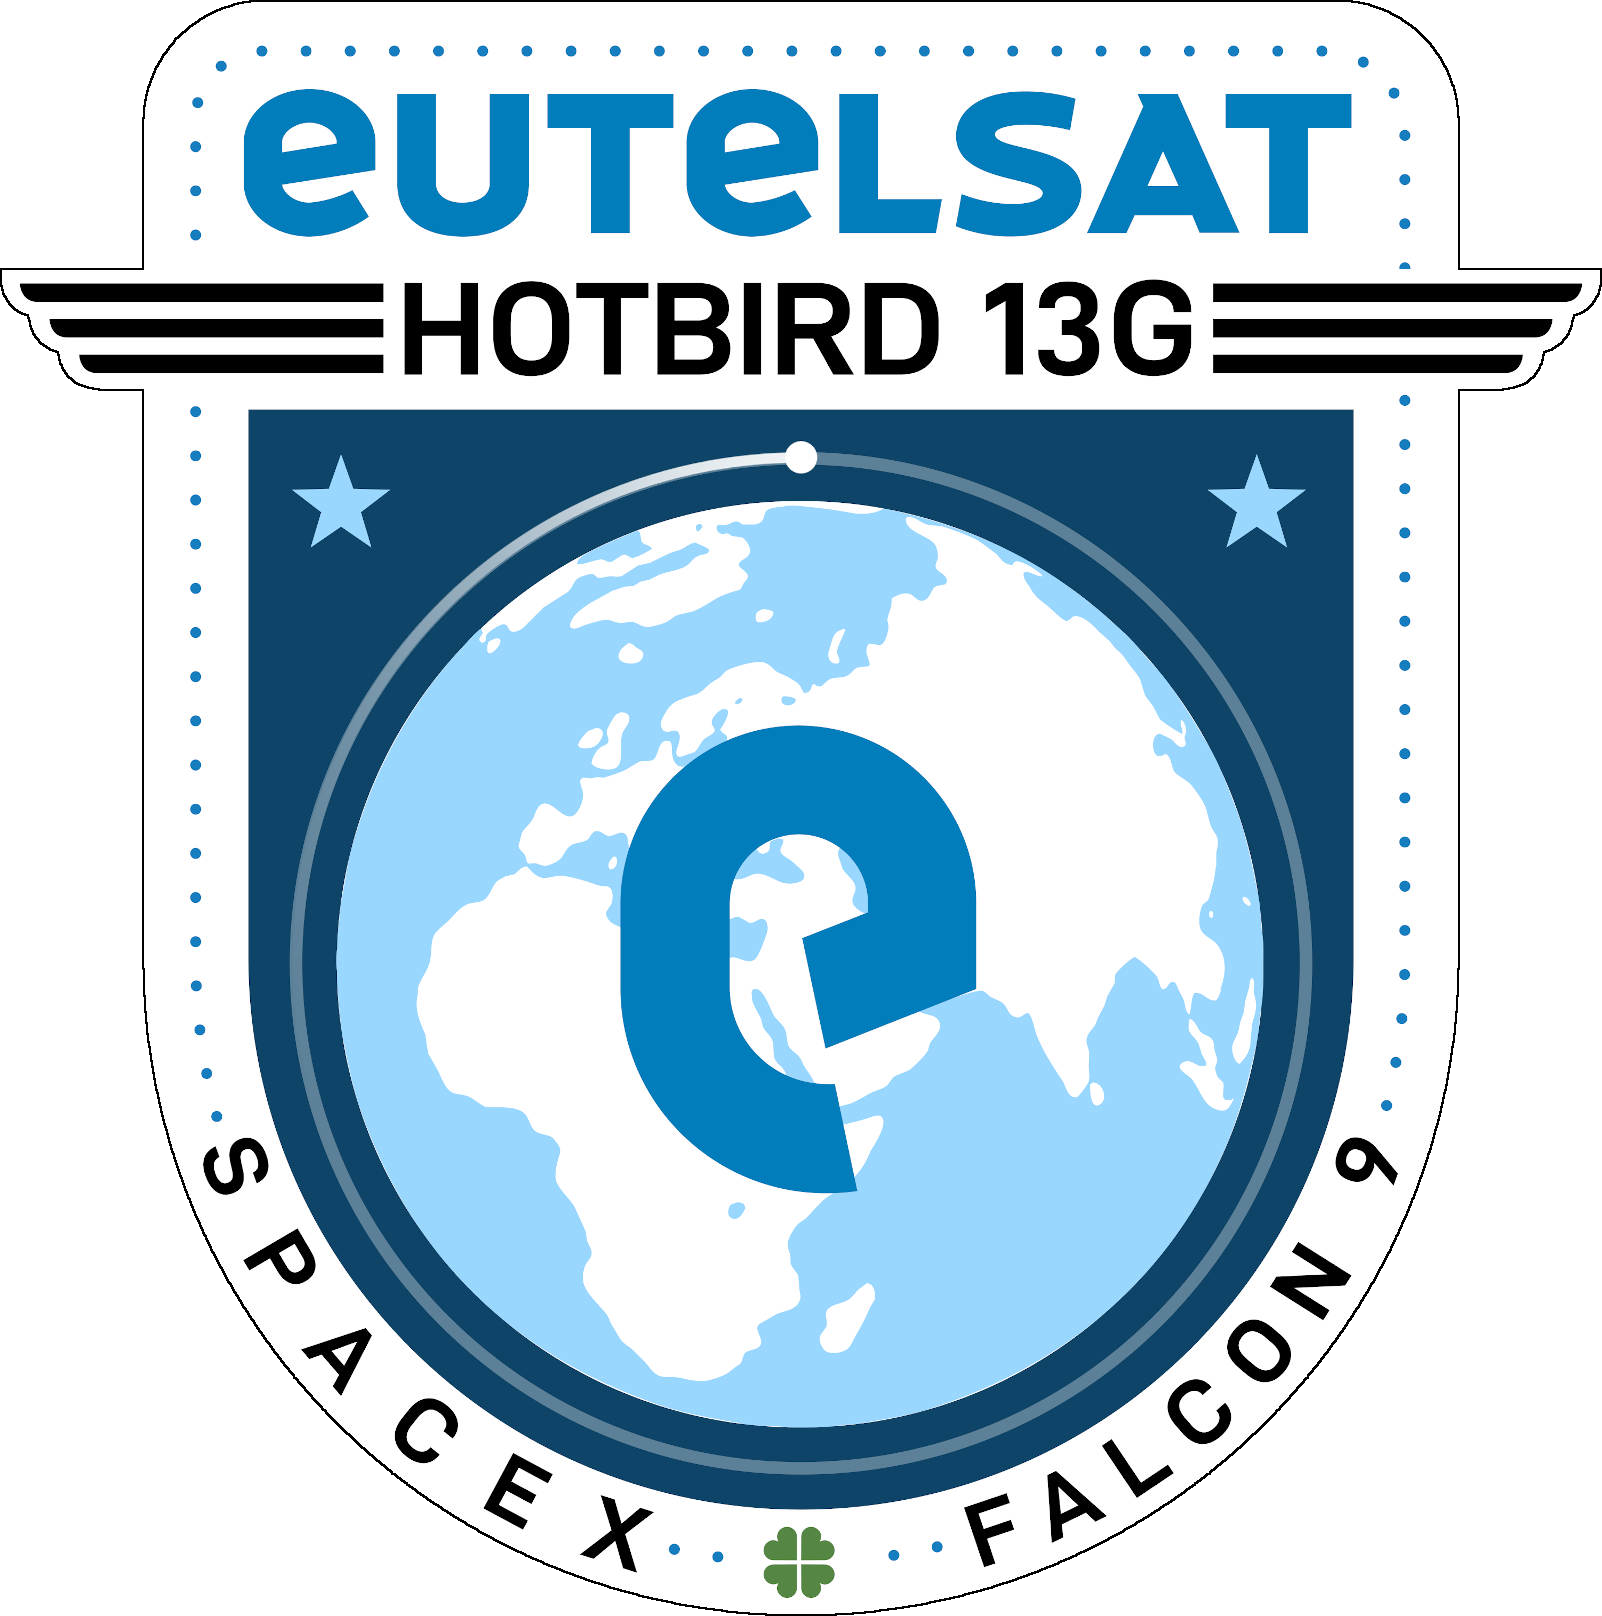 Mission patch for Hotbird 13G